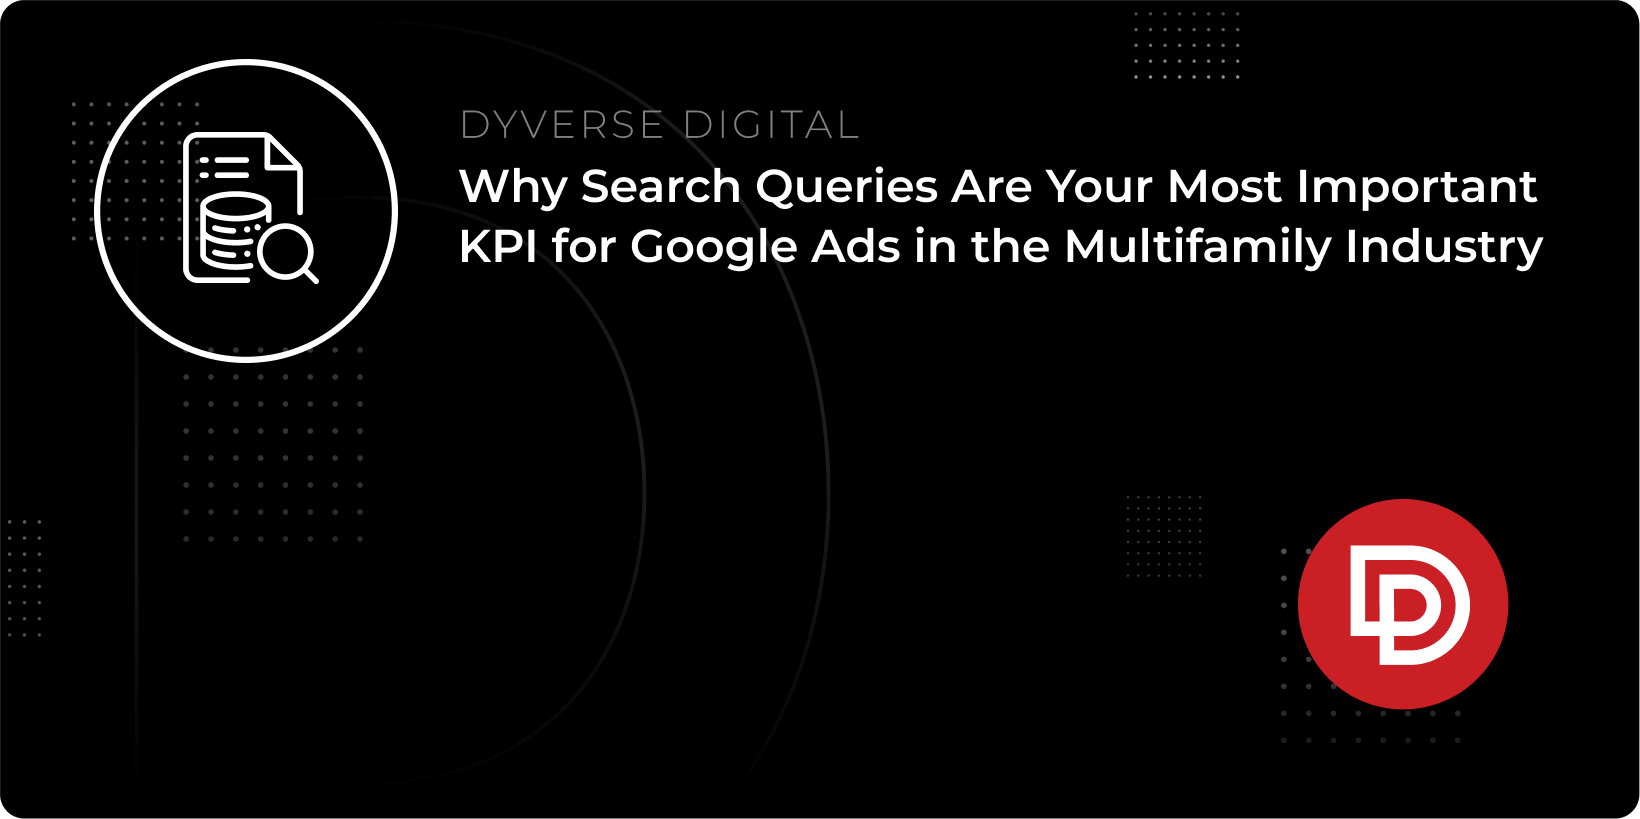 Why Search Queries Are Your Most Important KPI for Google Ads in the Multifamily Industry